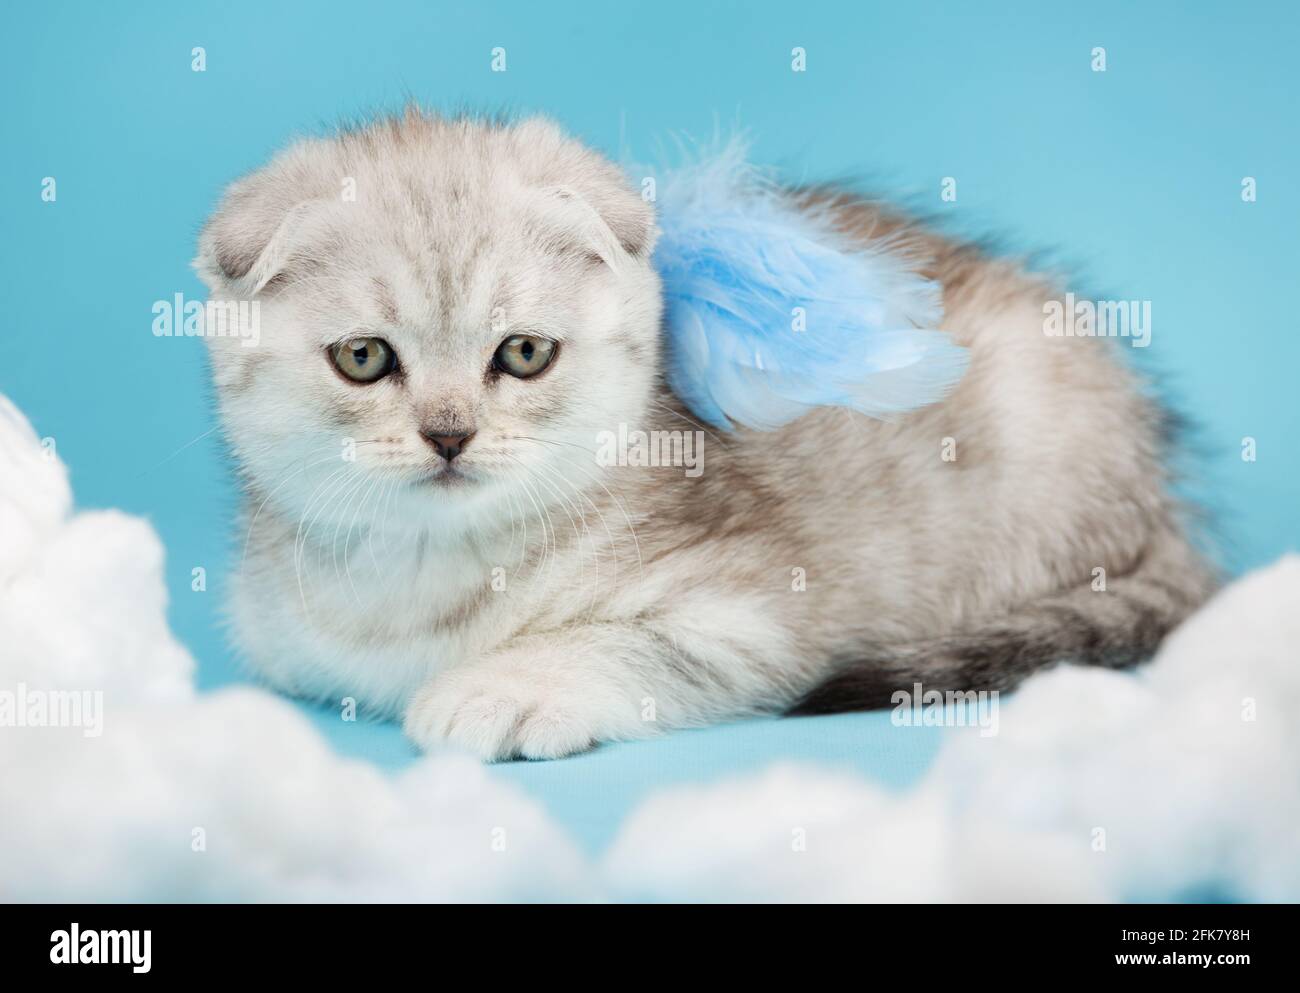 Close up portrait of a scottish kitten with little blue angel wings. Striped cat of cream color lies with an outstretched paw and looks into the camer Stock Photo